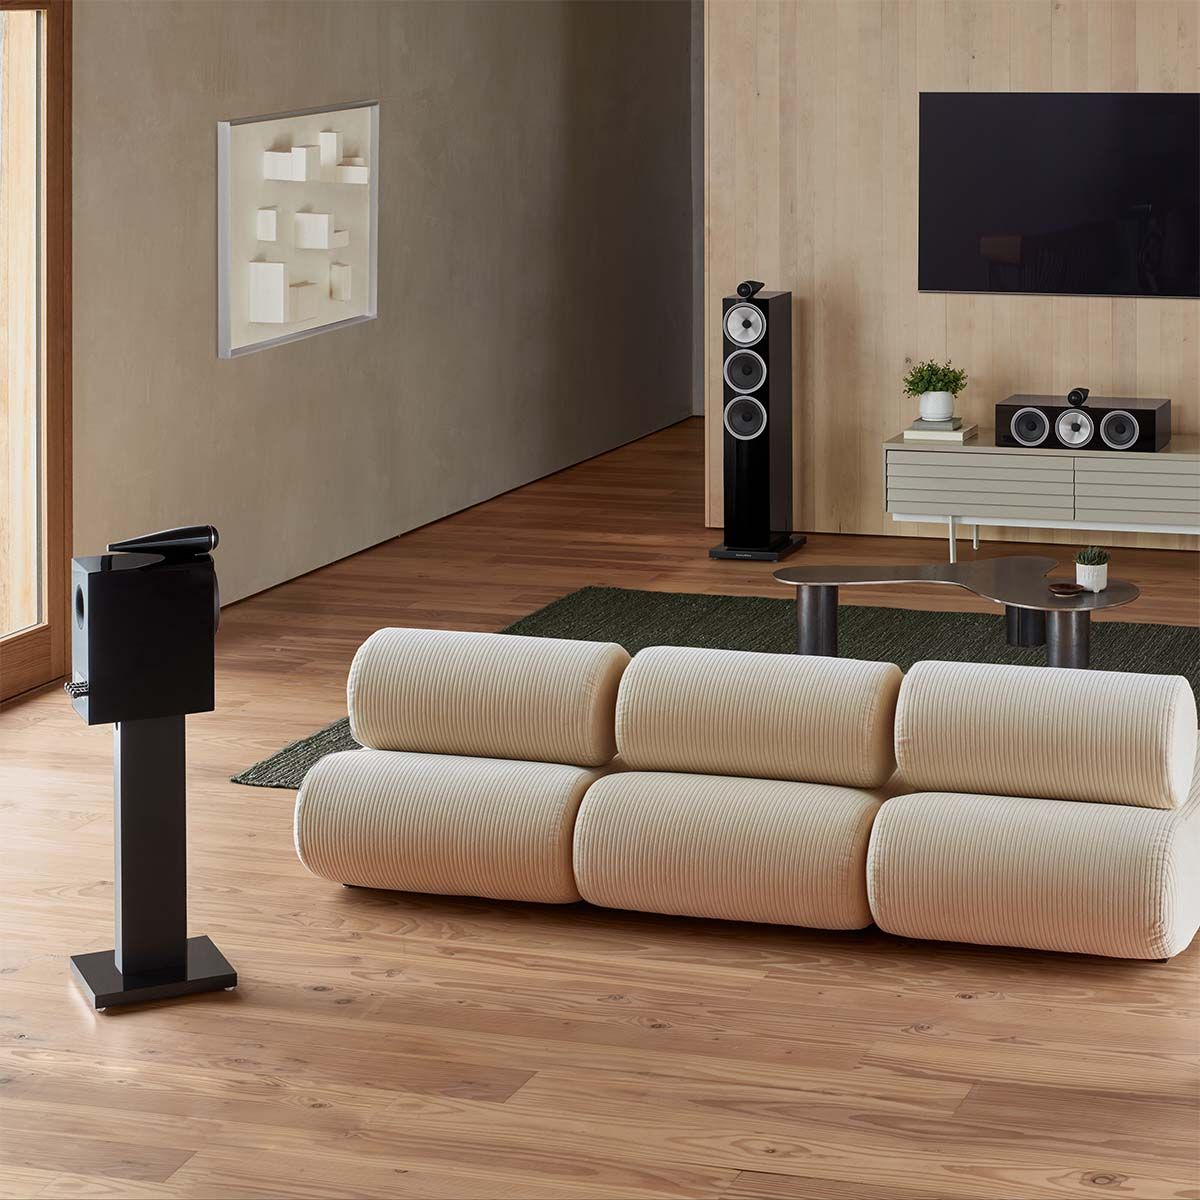 Bowers & Wilkins FS‑700 S3 Speaker Stands used in home theater